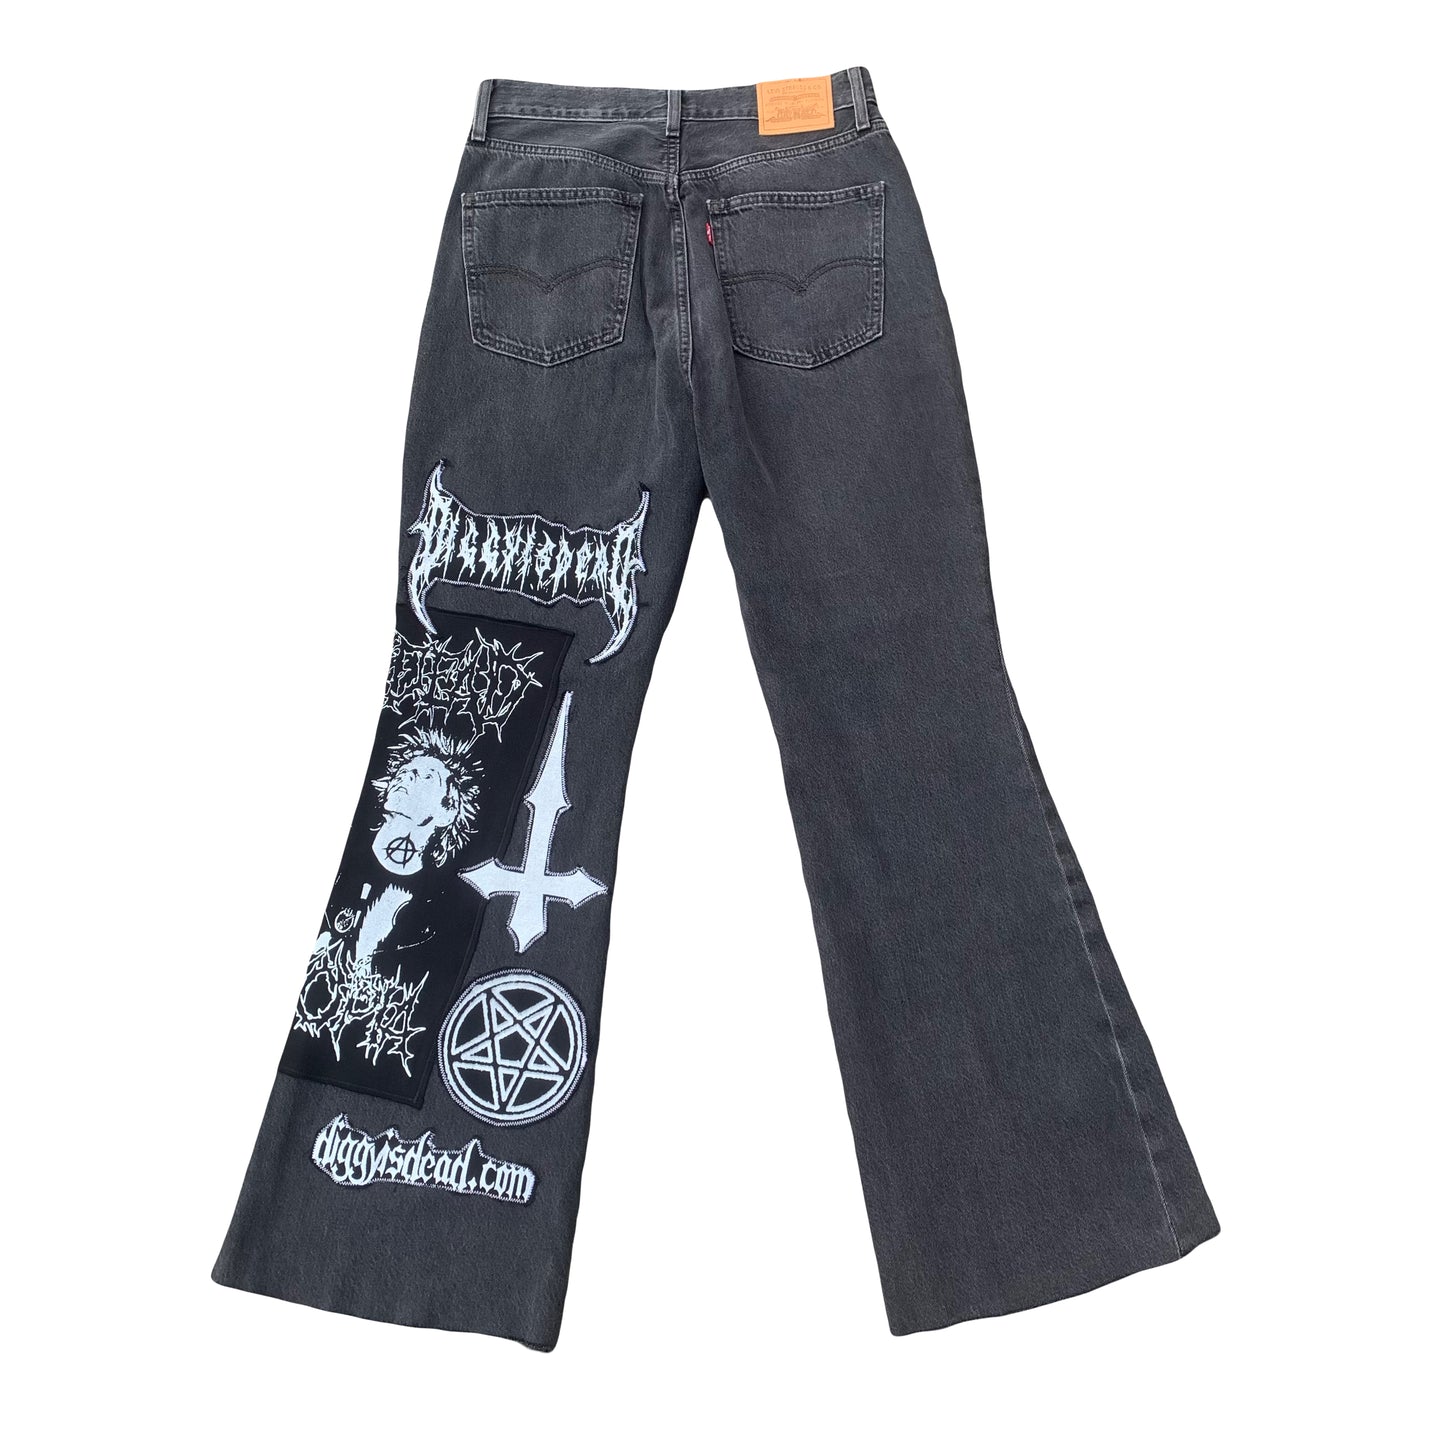 1/1 GBH bootcut jeans - 30x32